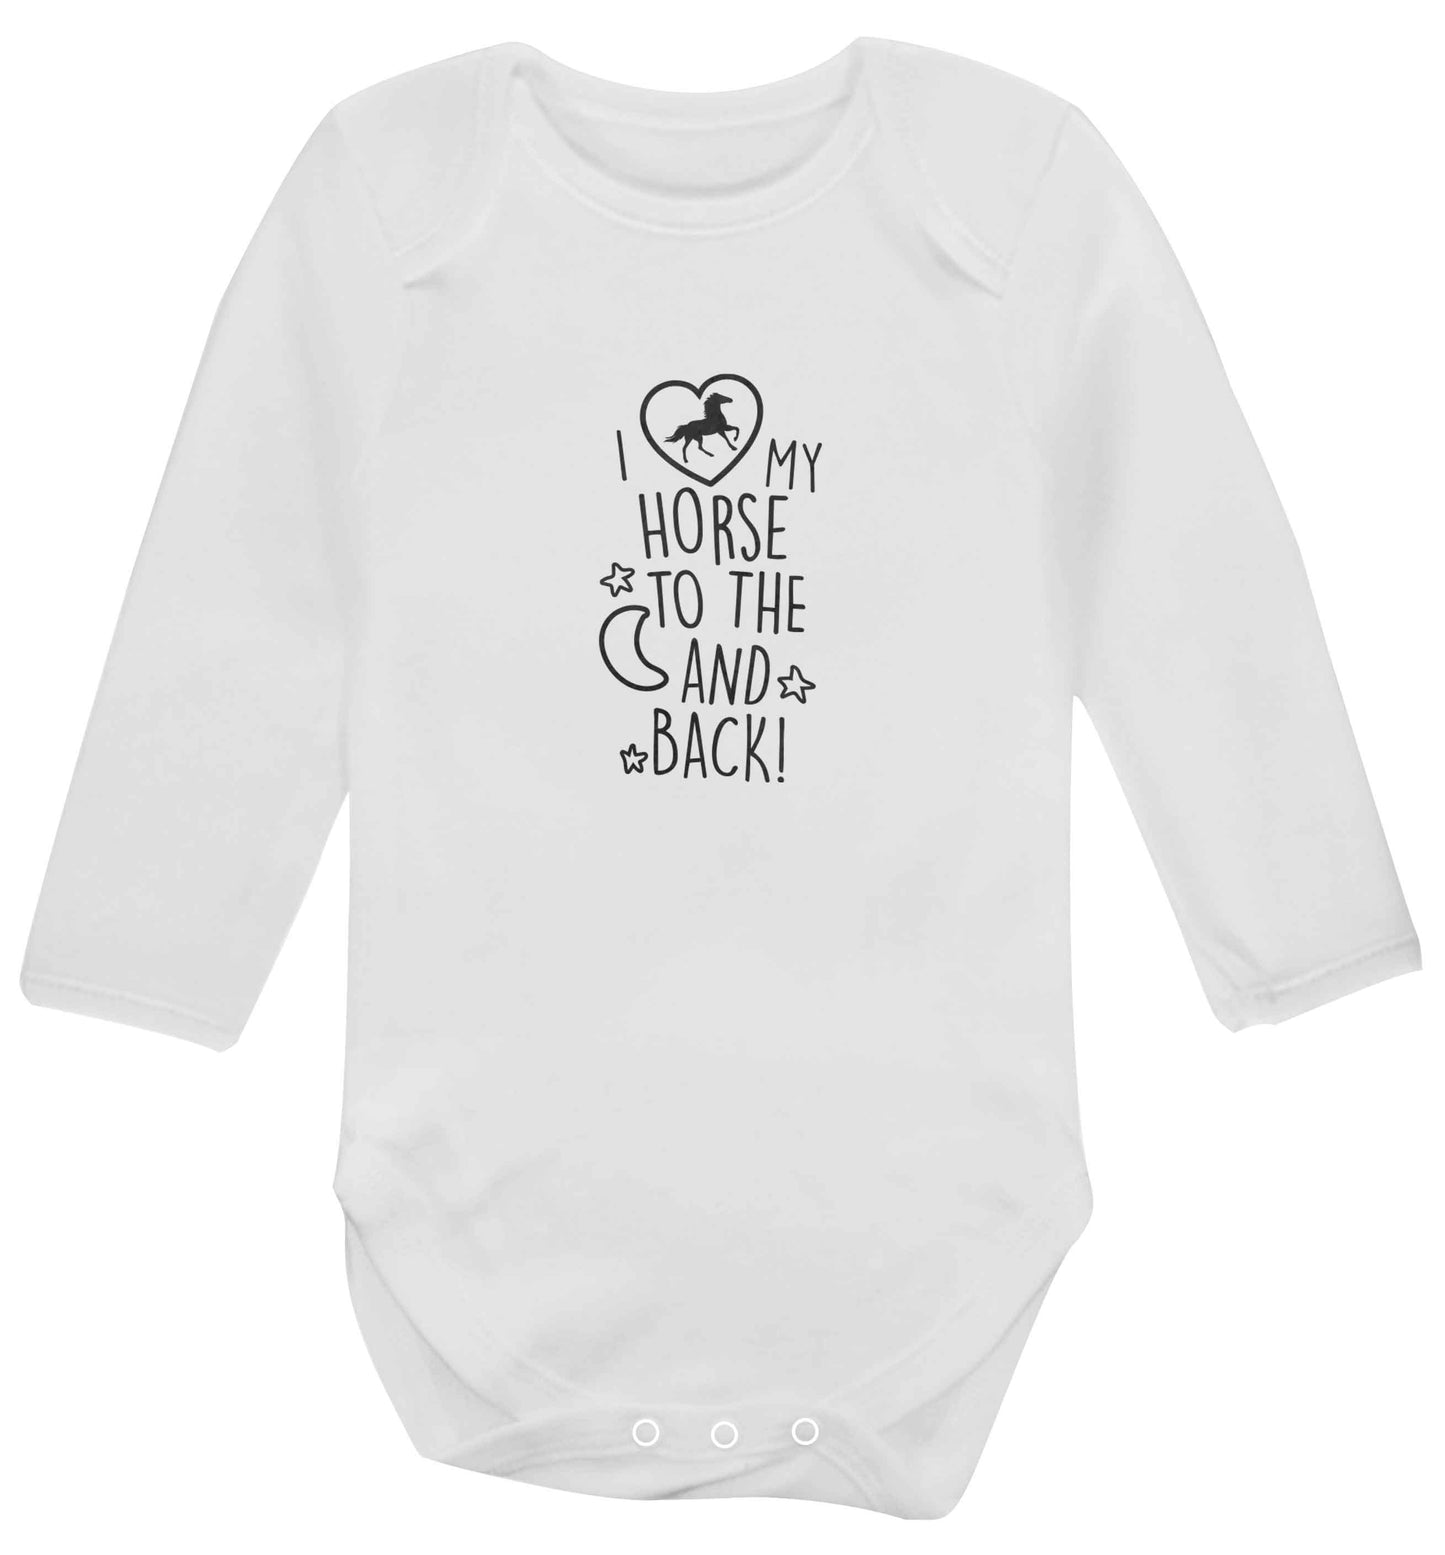 I love my horse to the moon and back baby vest long sleeved white 6-12 months